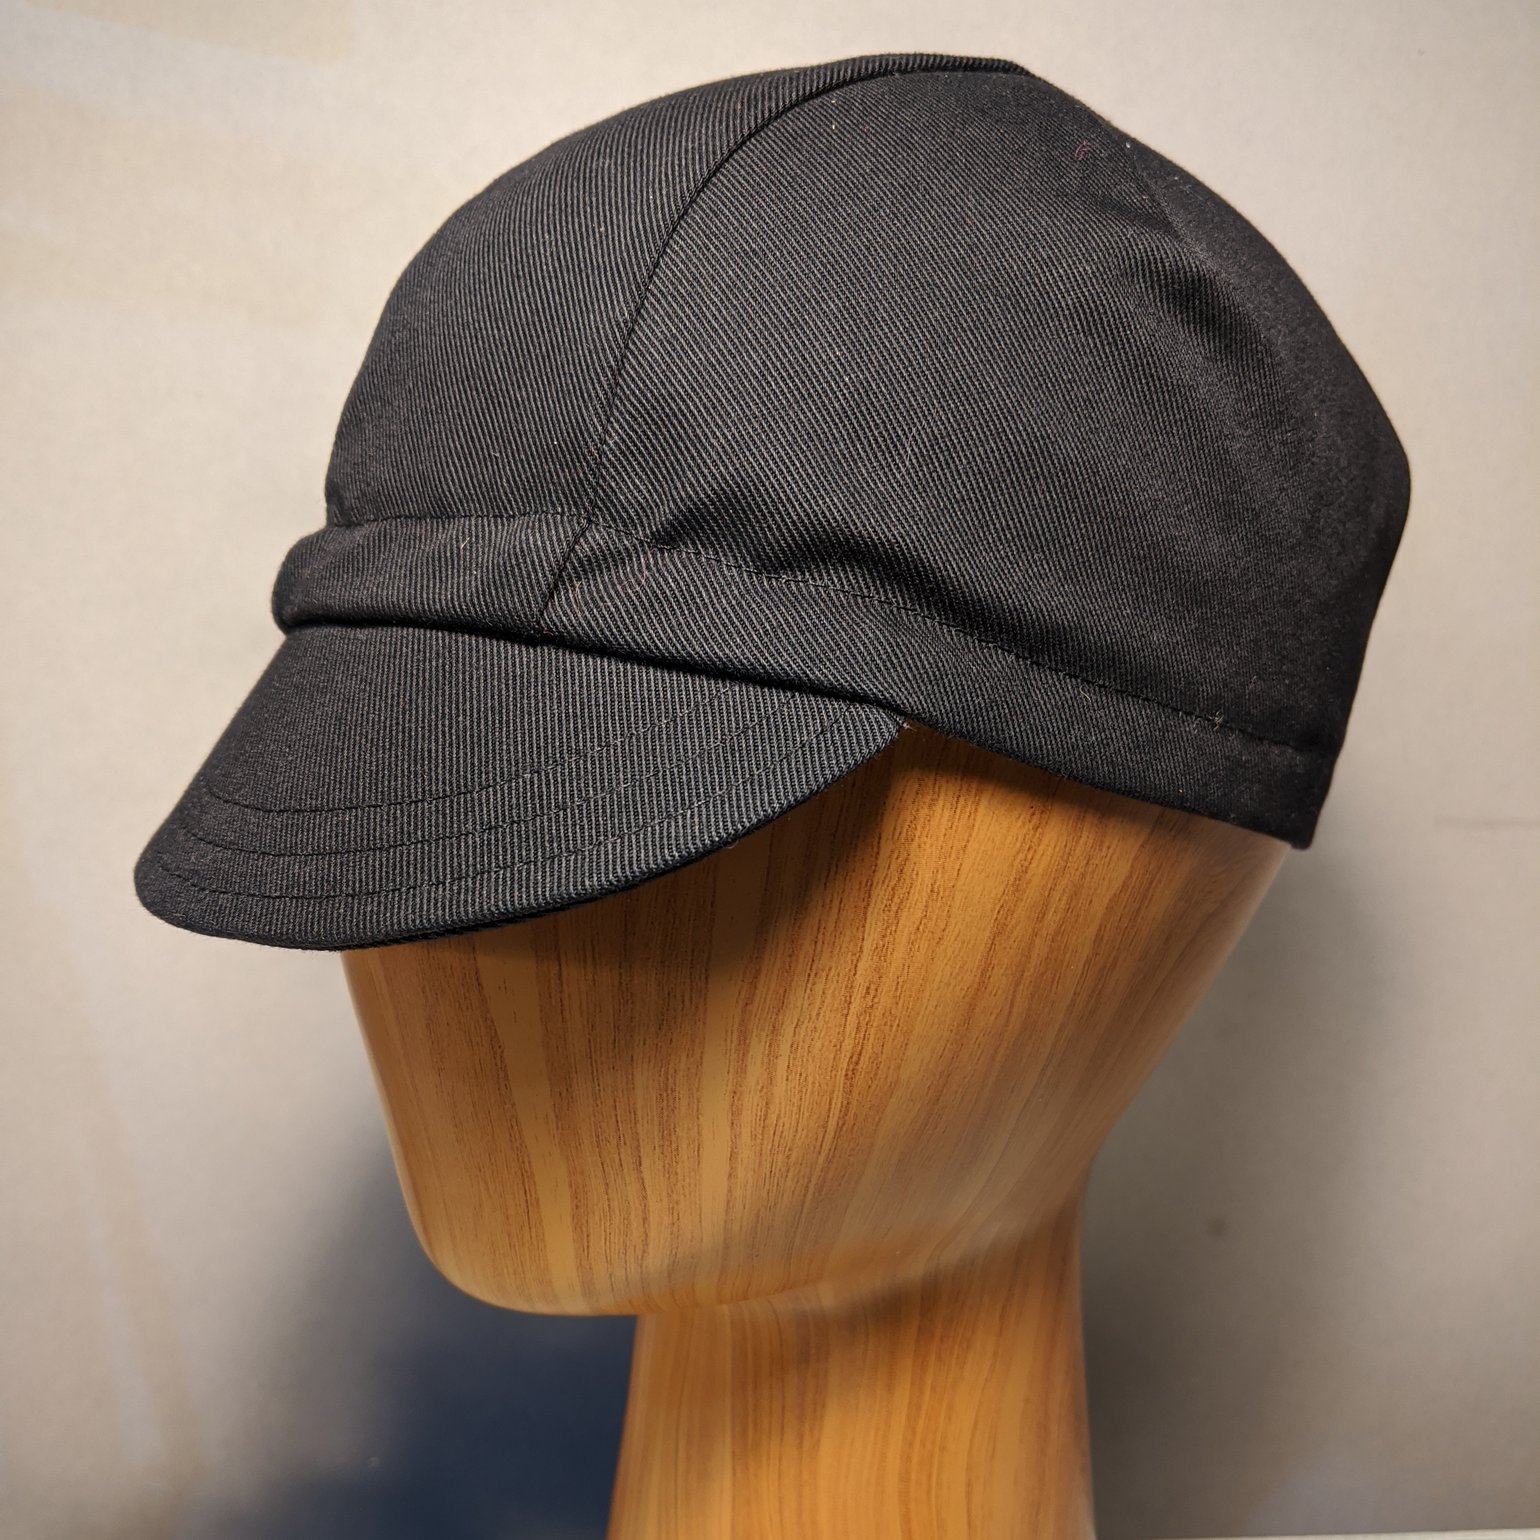 Cycling Cap Builder - Pleated 3 Panel Twill | Johnson Stitchworks